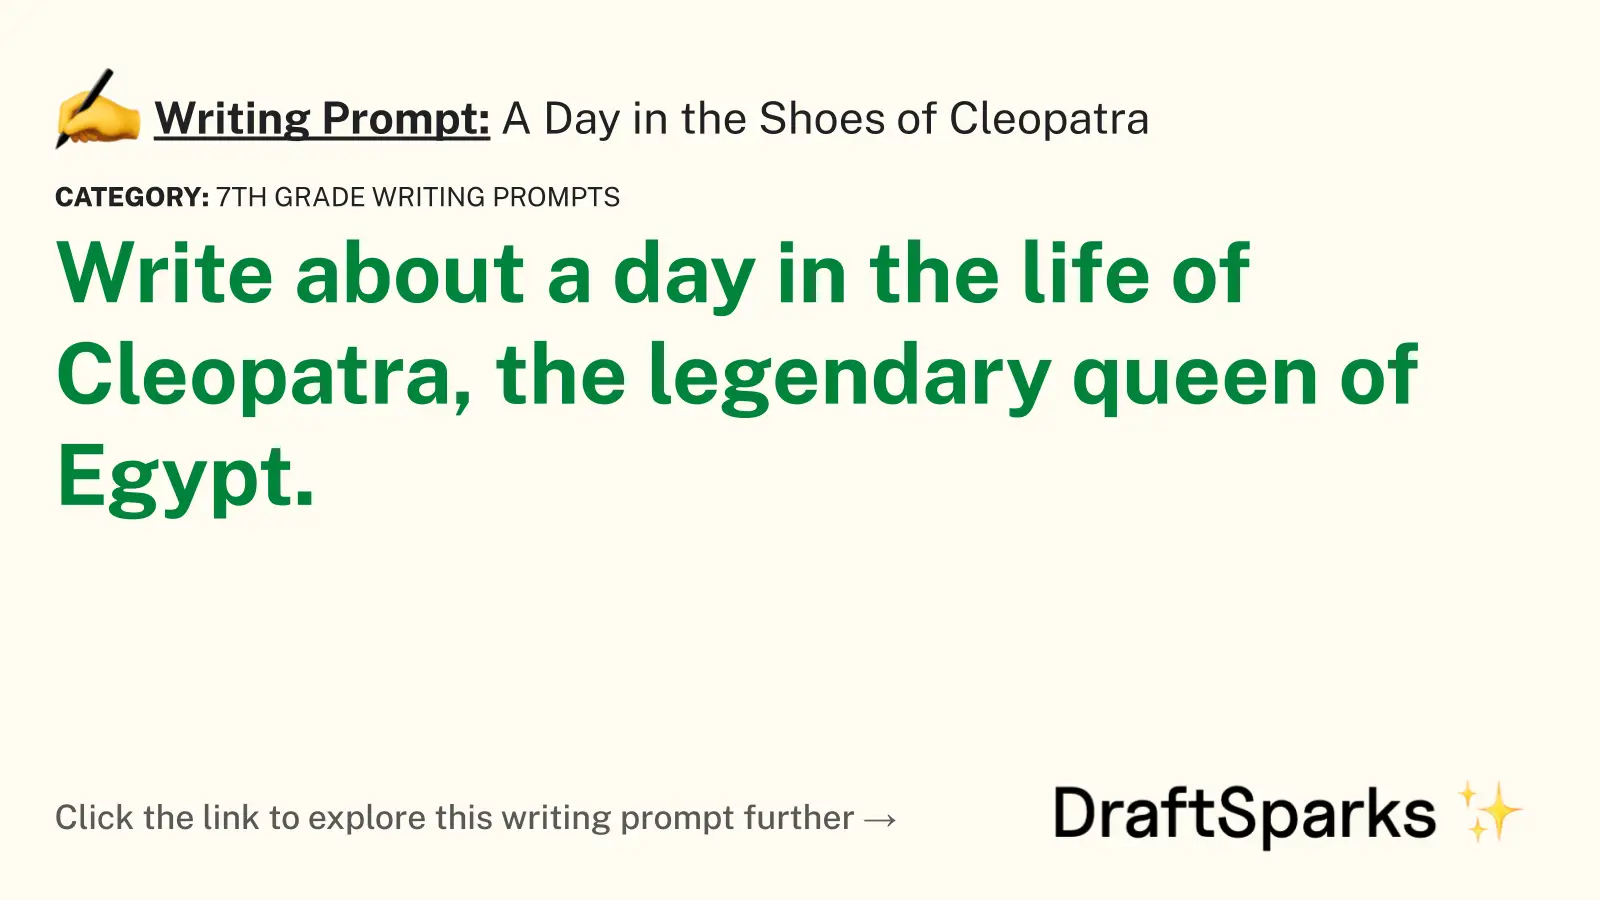 A Day in the Shoes of Cleopatra